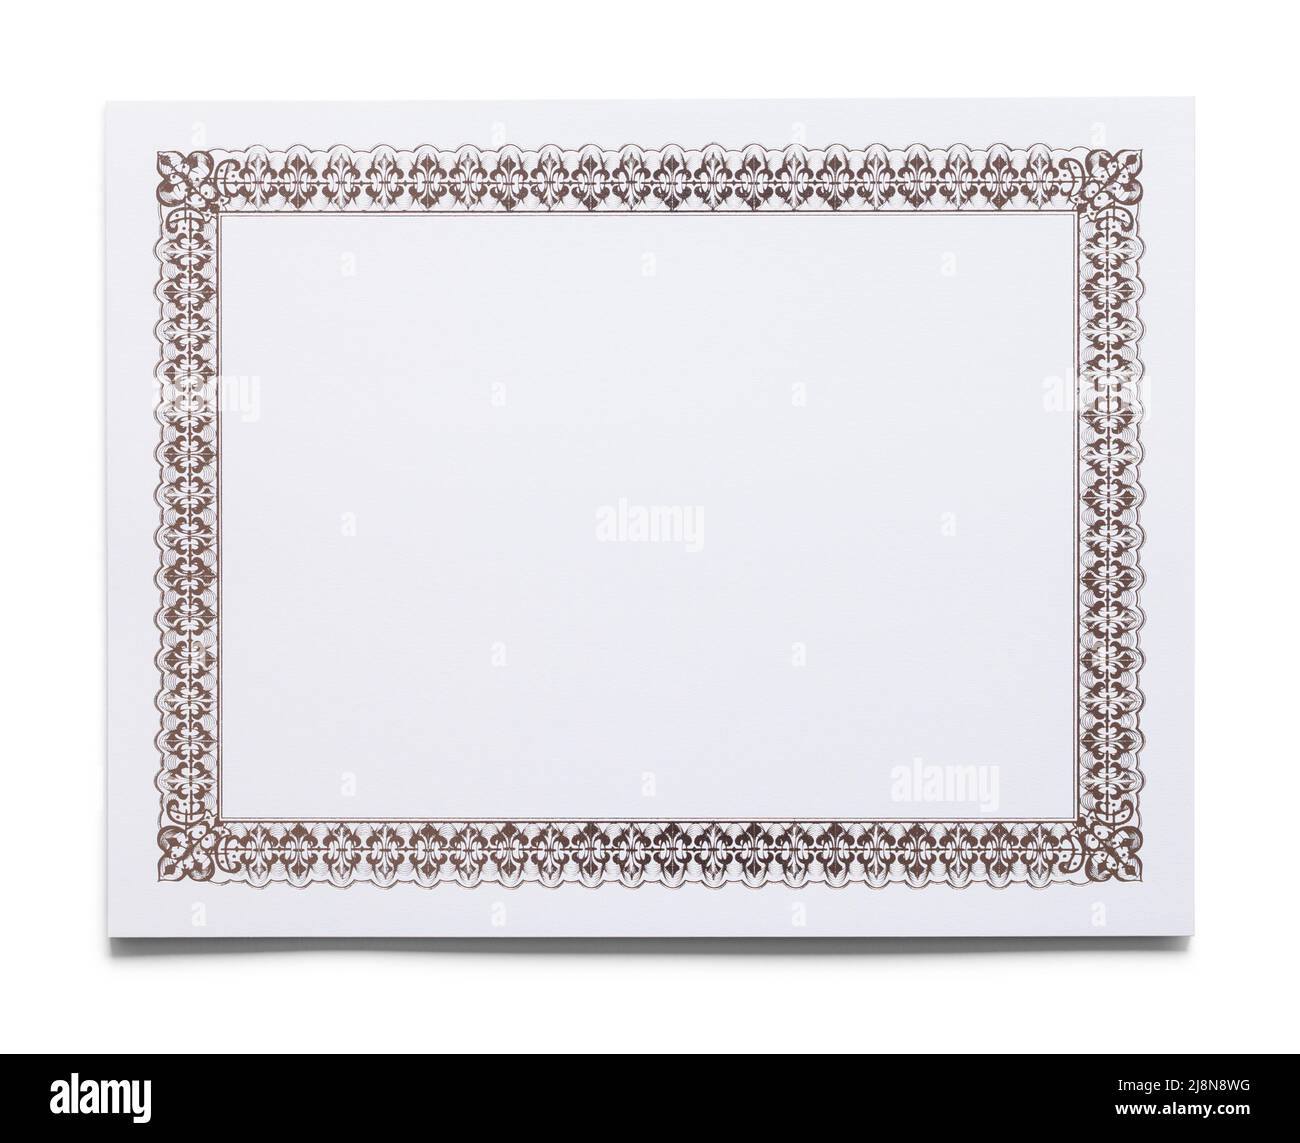 Ornate Blank Certifcate Paper Cut Out on White. Stock Photo